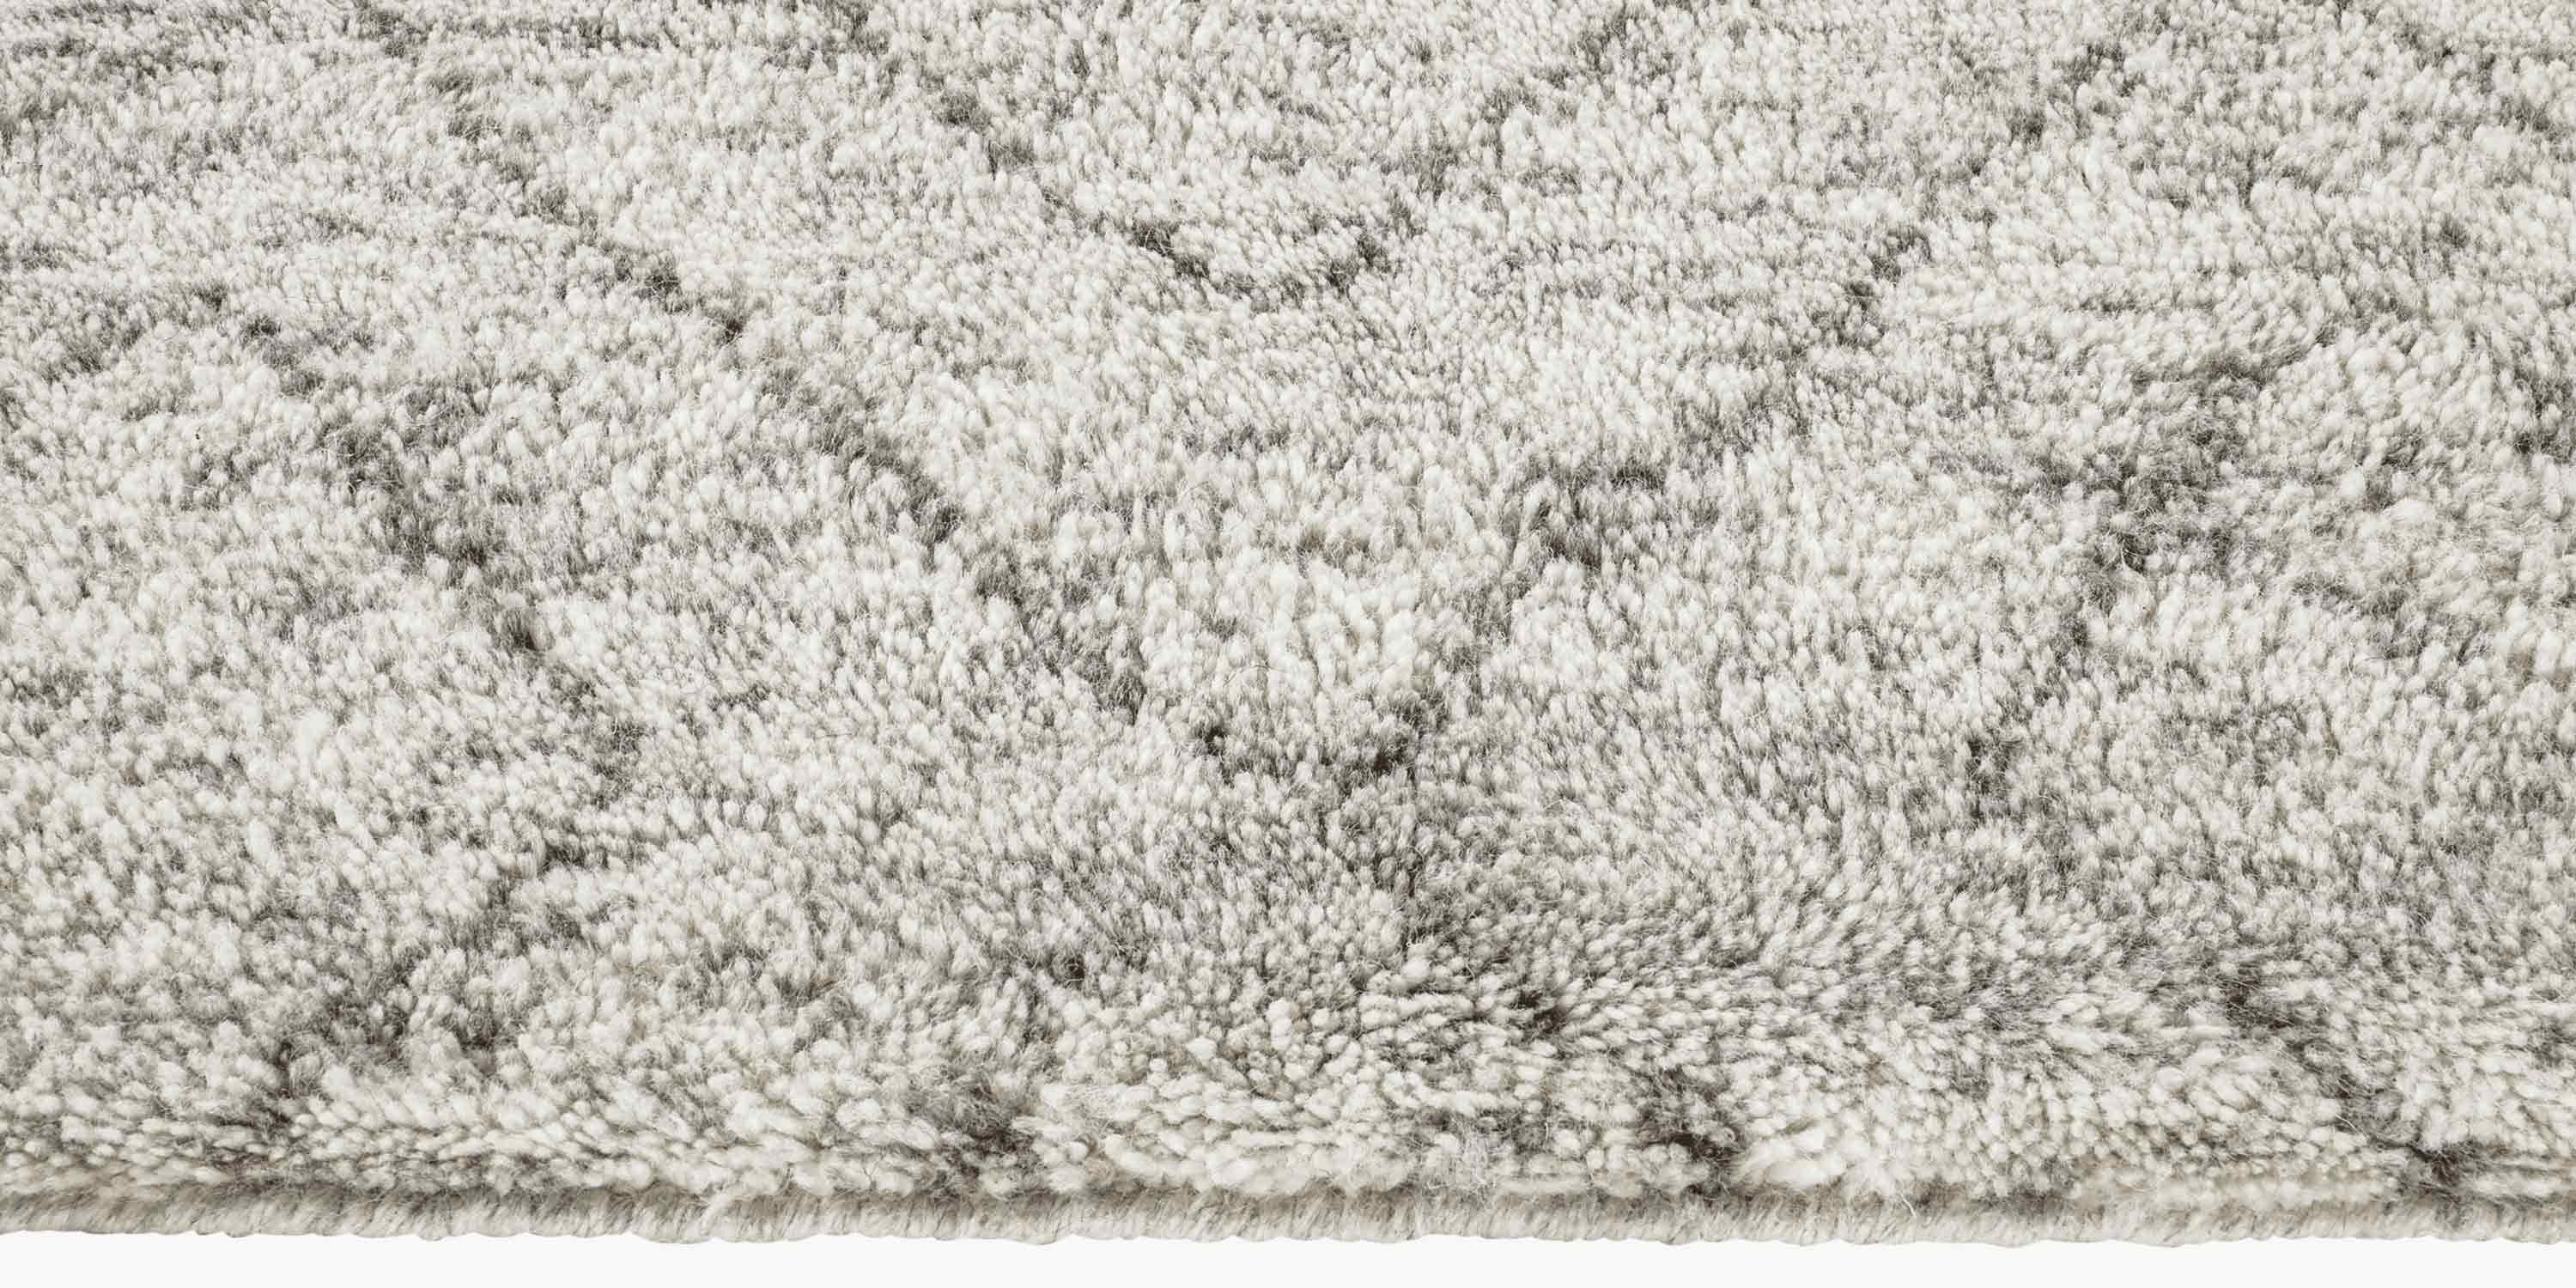 For Sale: Silver Ben Soleimani Double Diamond Rug– Moroccan Hand-knotted Wool Grey 12'x15' 3